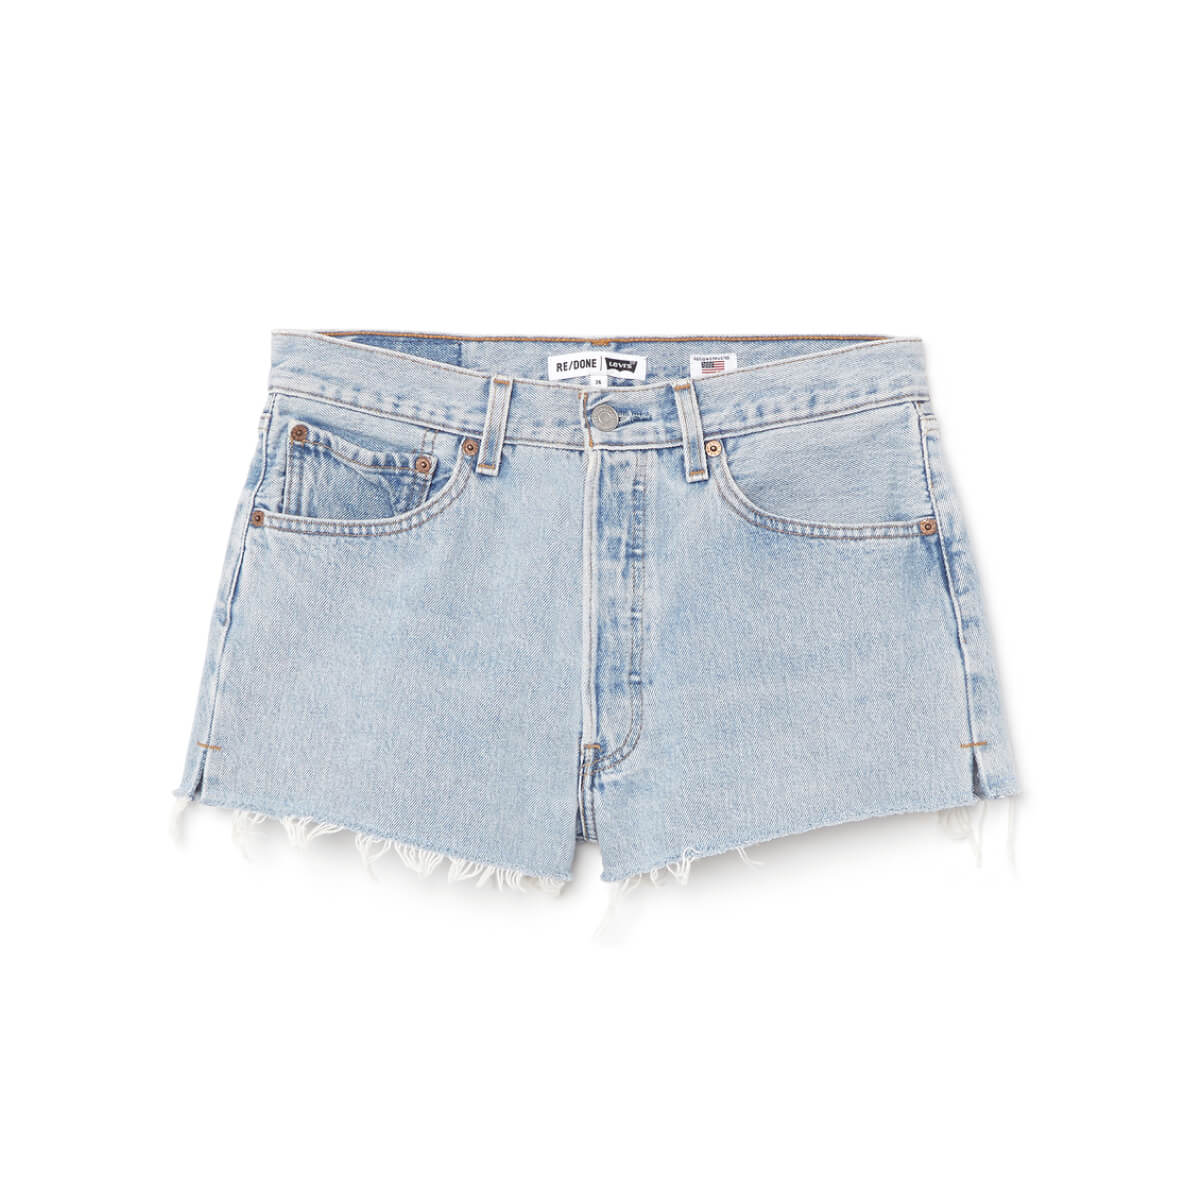 RE/DONE shorts